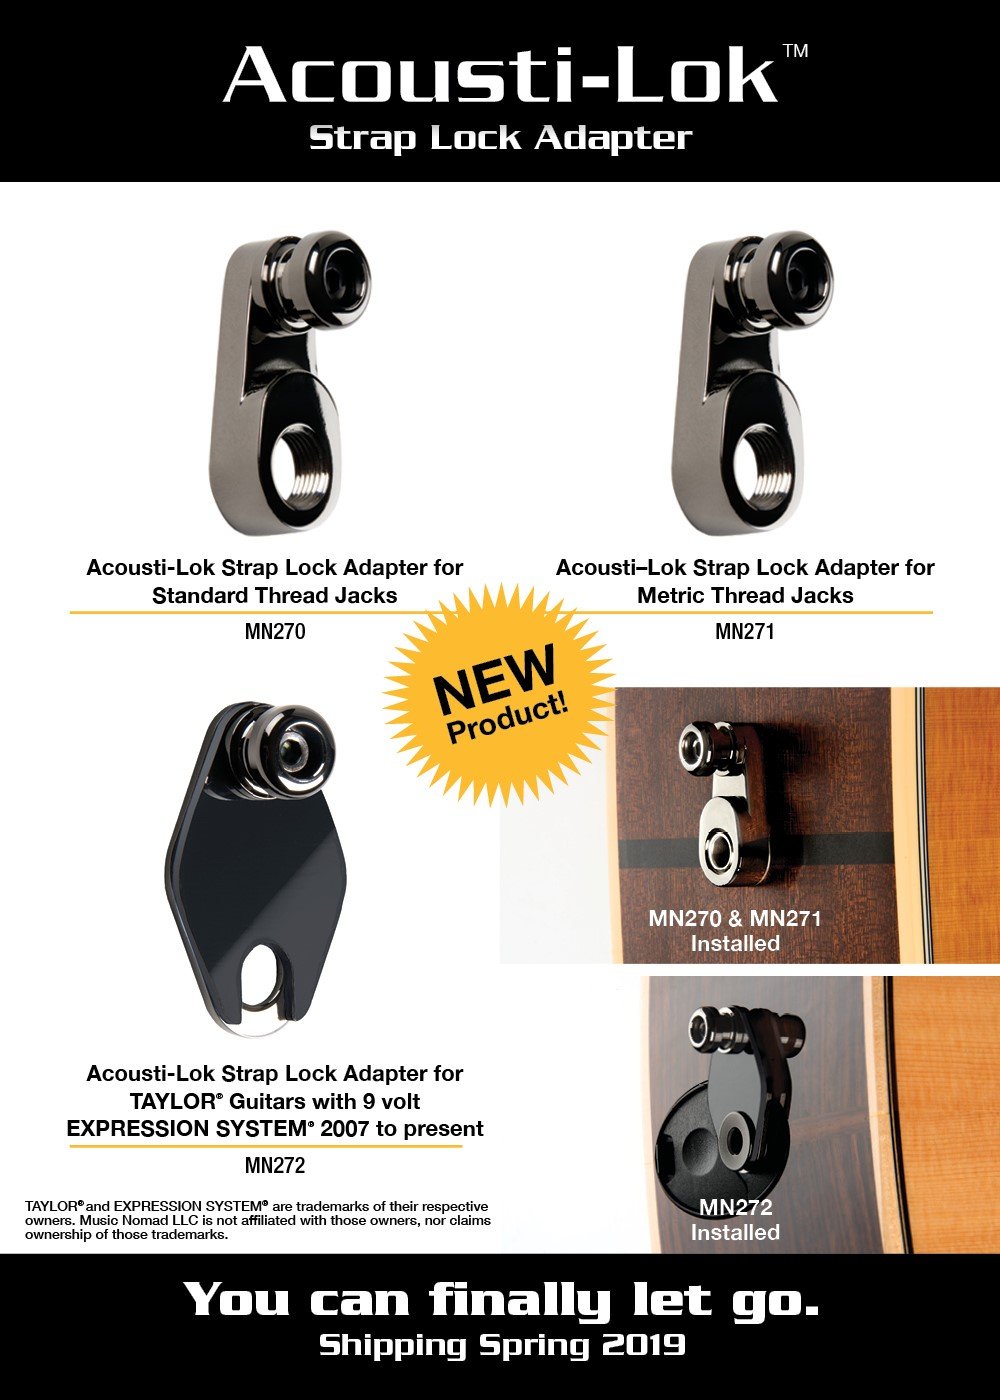 Music Nomad Acousti-Lok Strap Lock Adapter for Taylors with Expression System MN272 - GuitarPusher